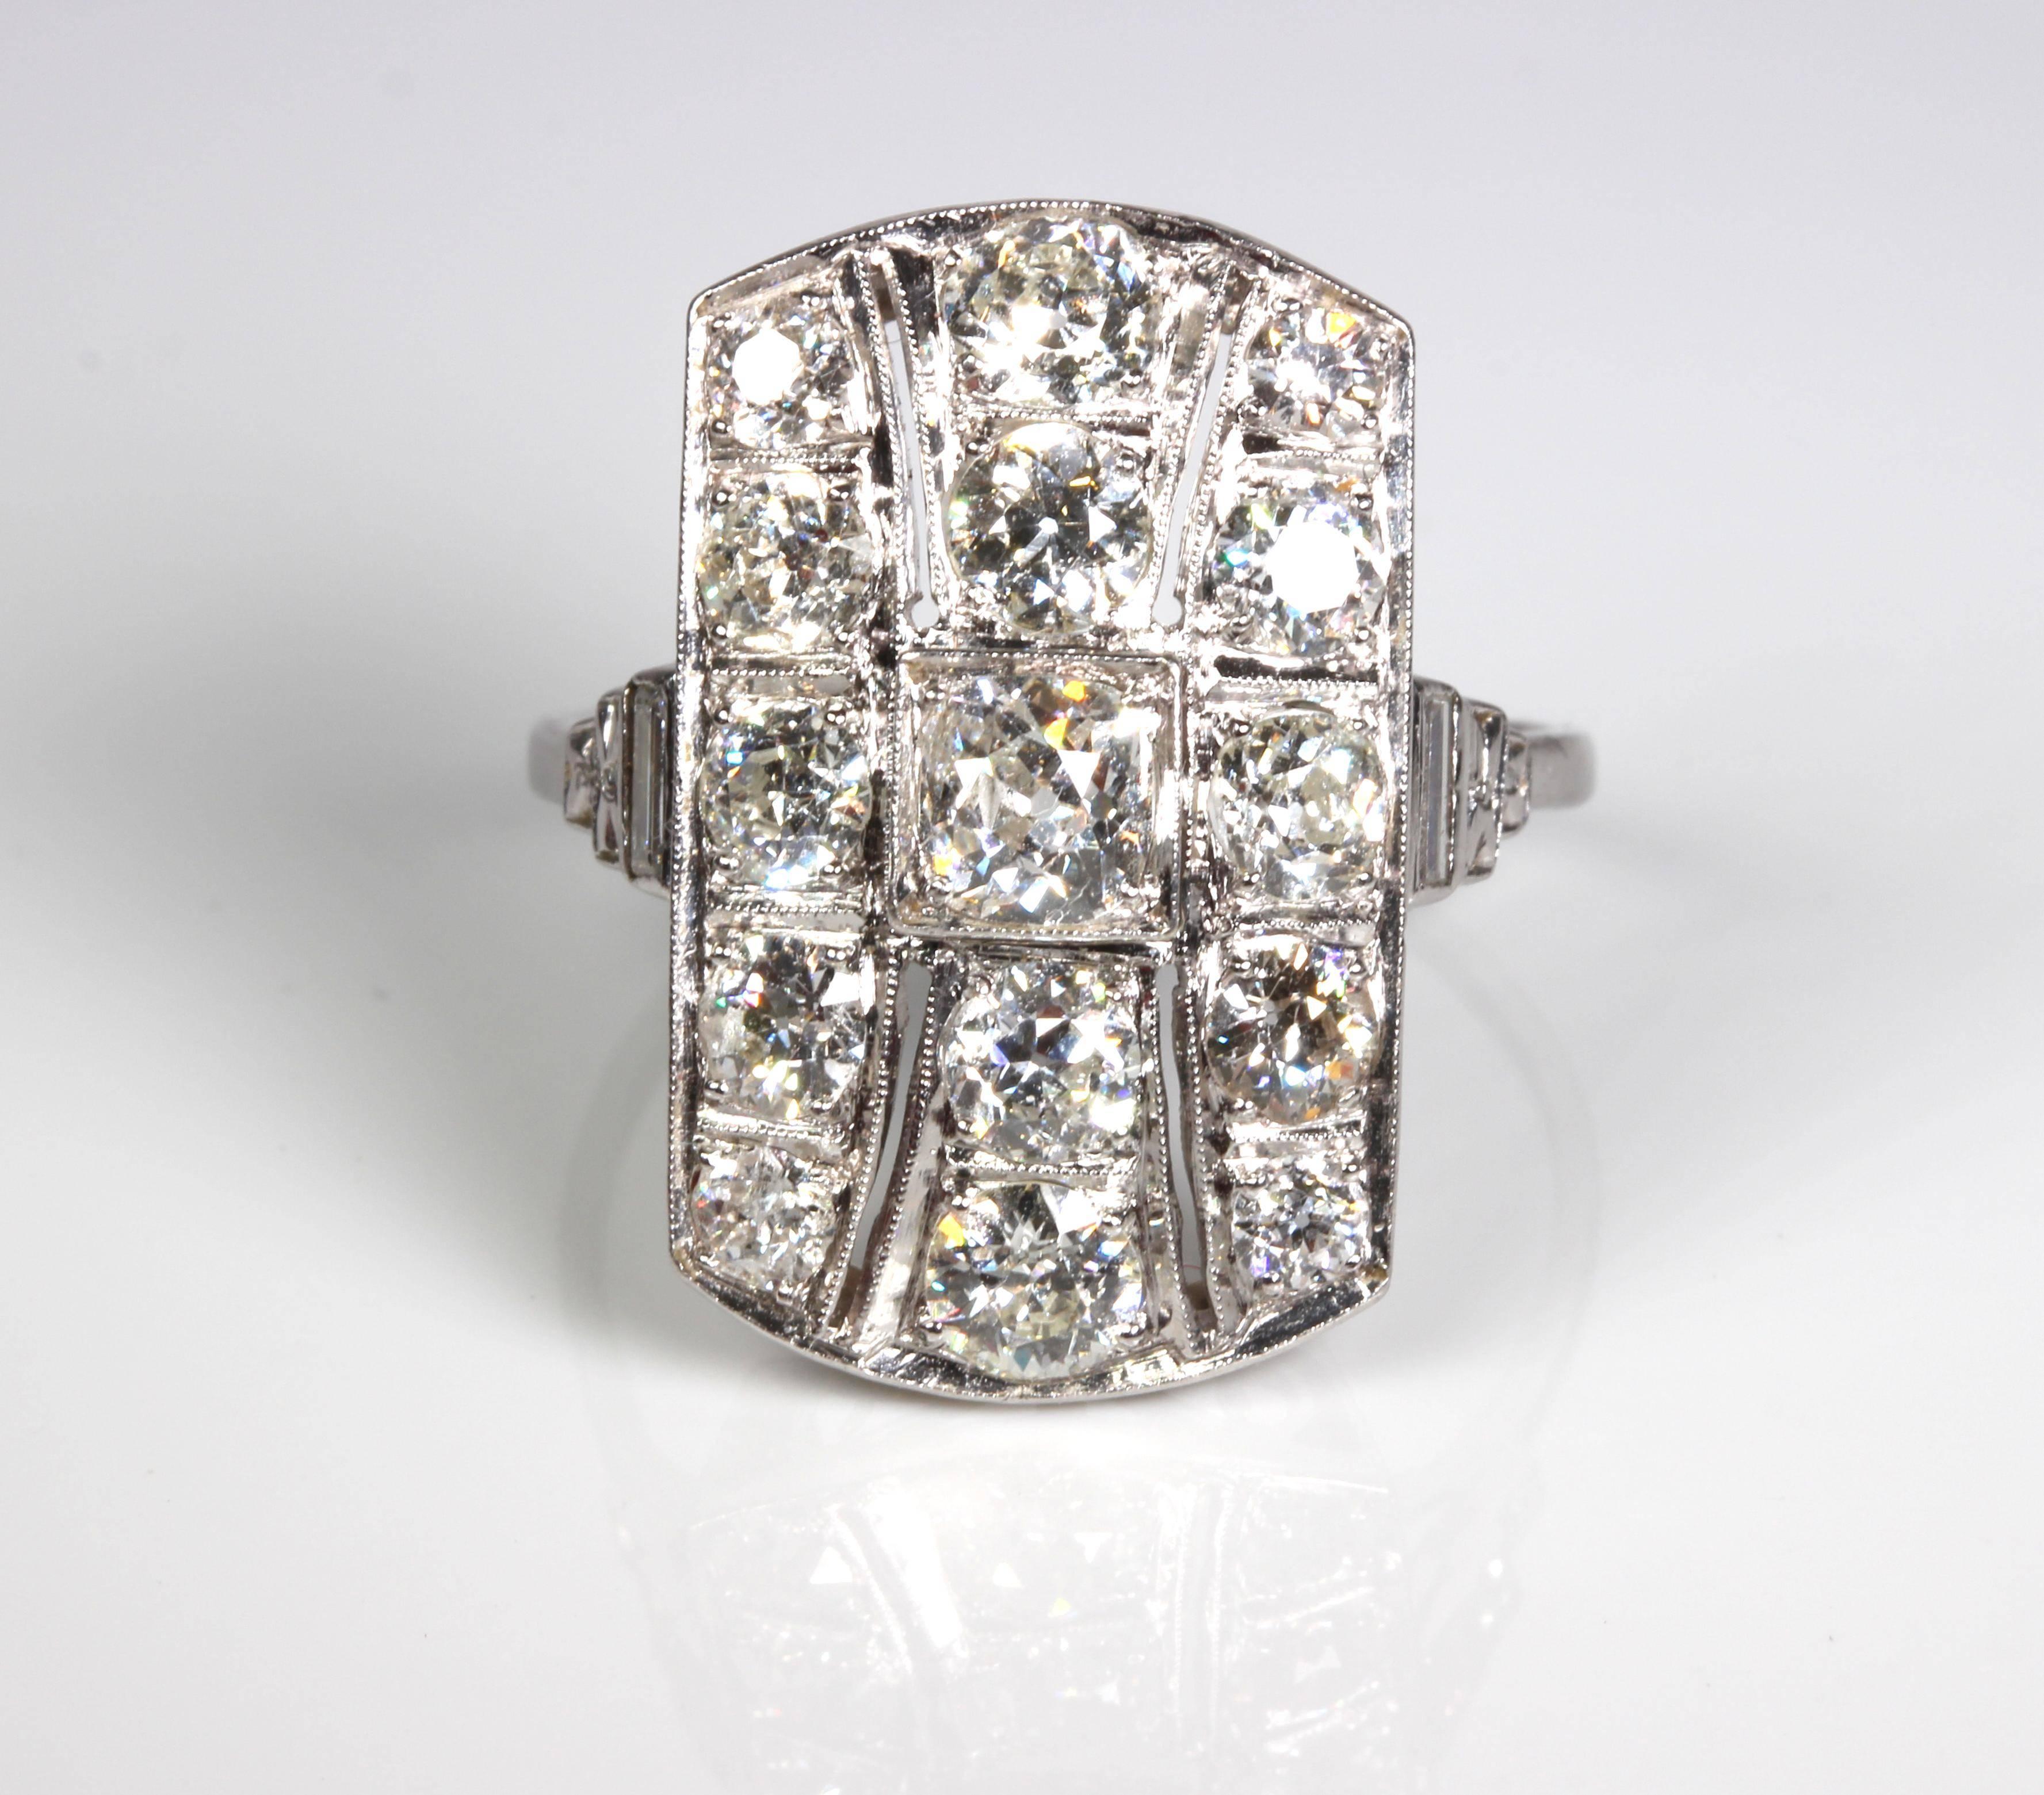 Original art deco platinum diamond dress ring. Absolutely superb and stunning -
 wear this and feel like royalty! Centre old cushion facetted cut diamond of 0.52ct I/SI with 4 diamonds in the centre row of 1.06ct and 10 diamonds in the 2 side rows